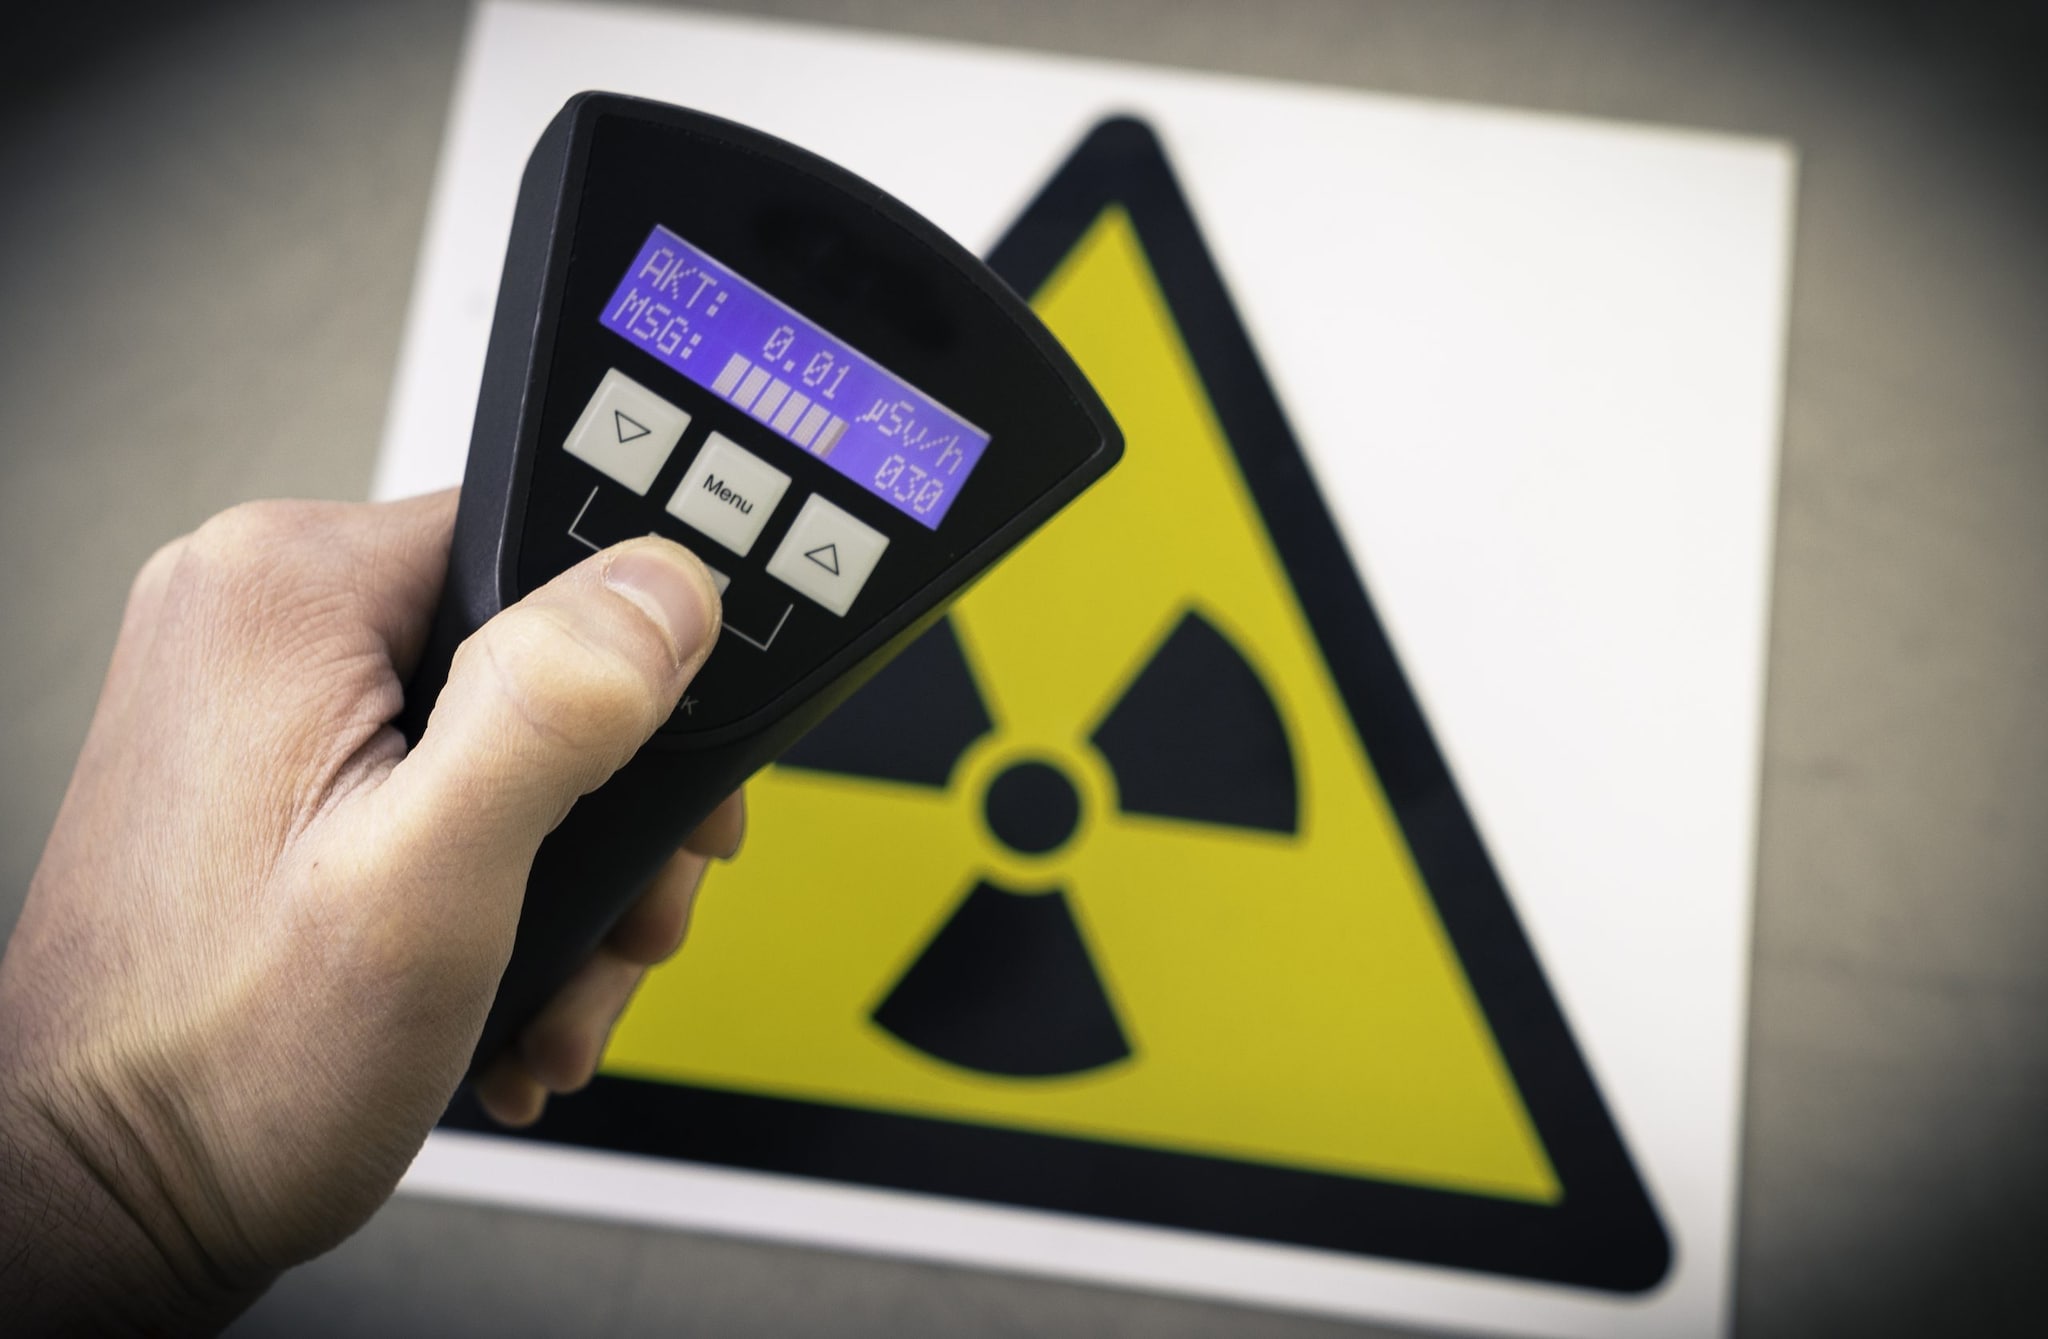 Hand holding device to measure radiation levels. Sign with triangle radiation tri-foil symbol is in the background.